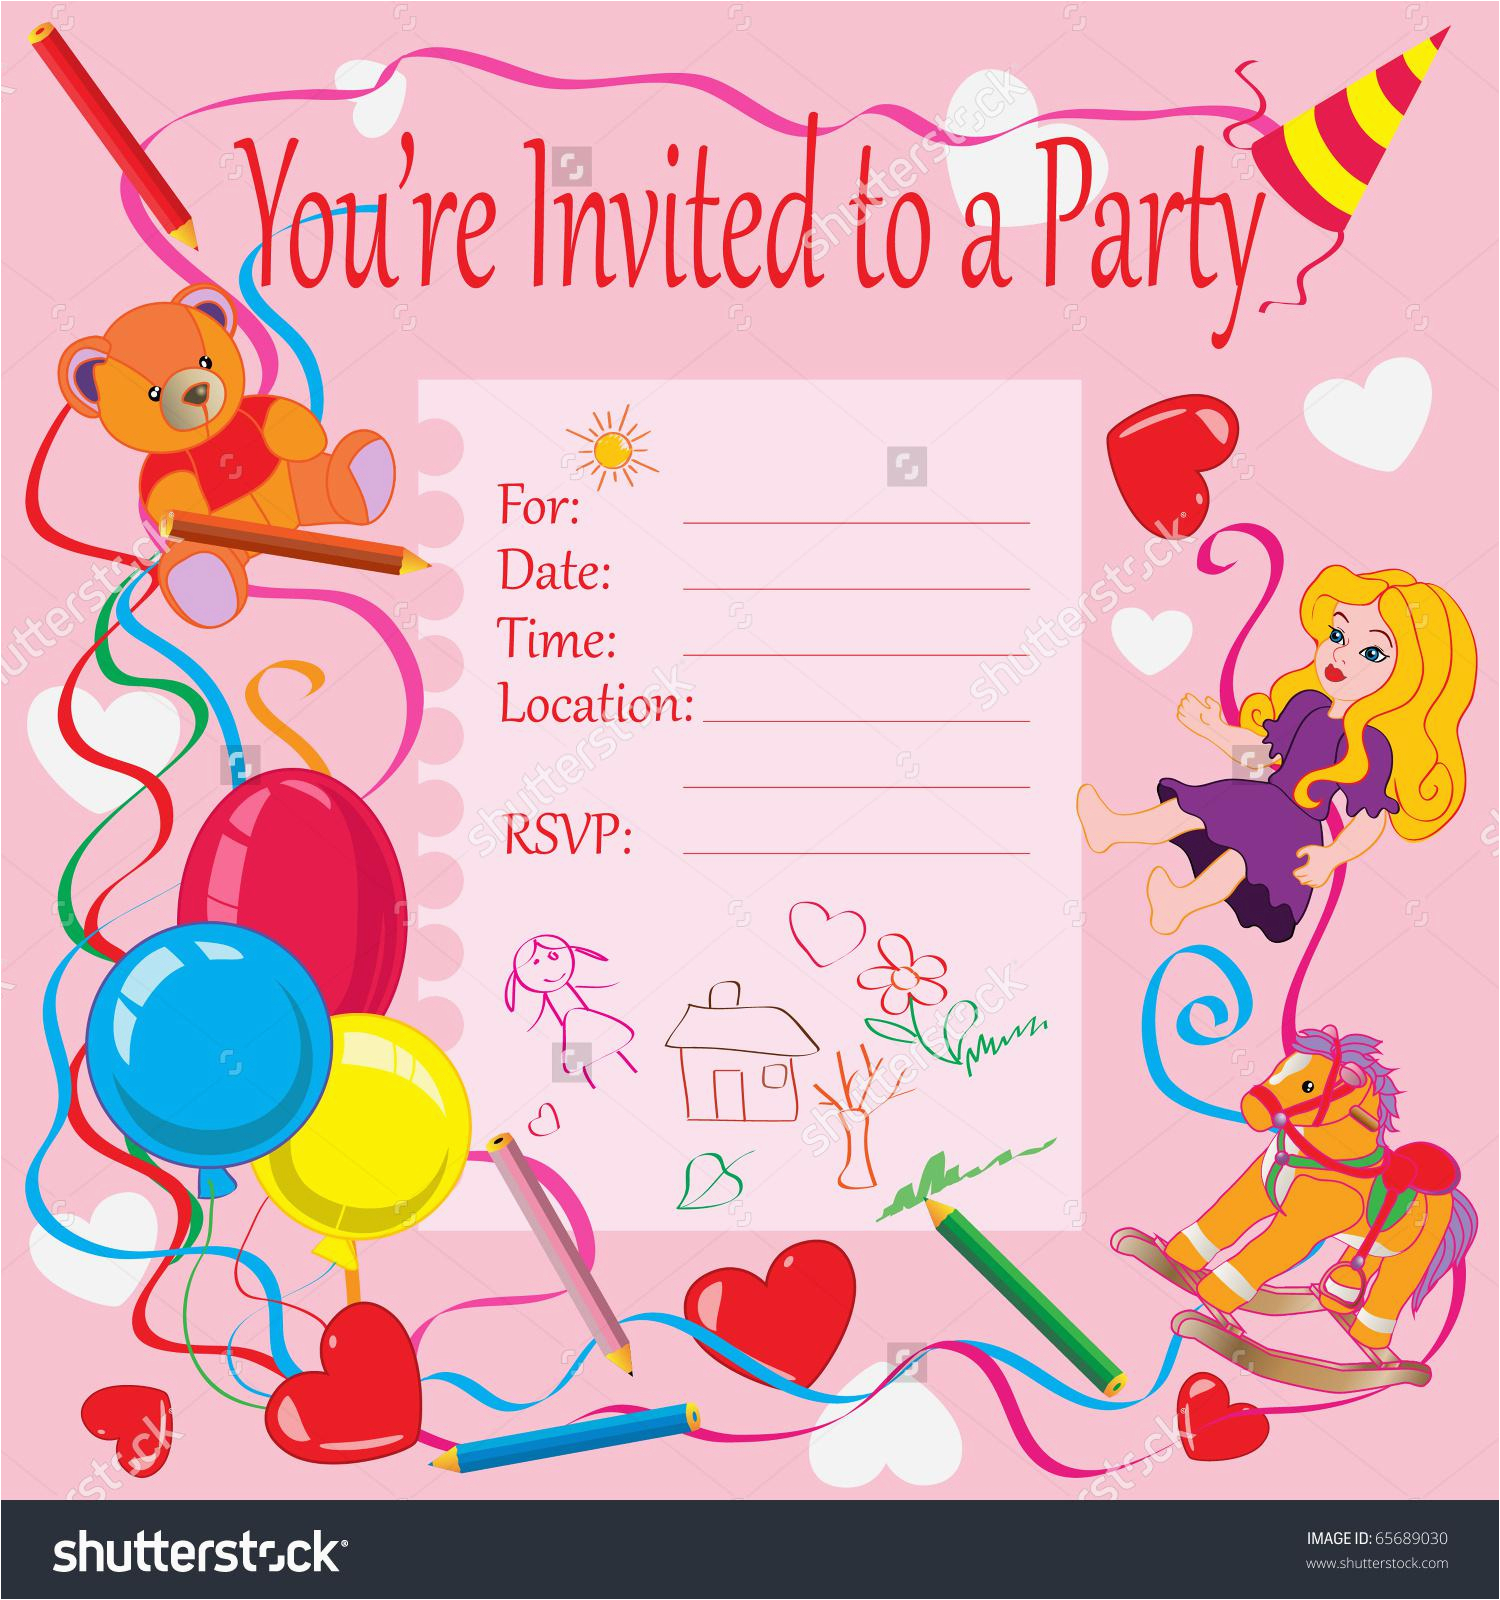 How Can I Make A Birthday Invitation For Free